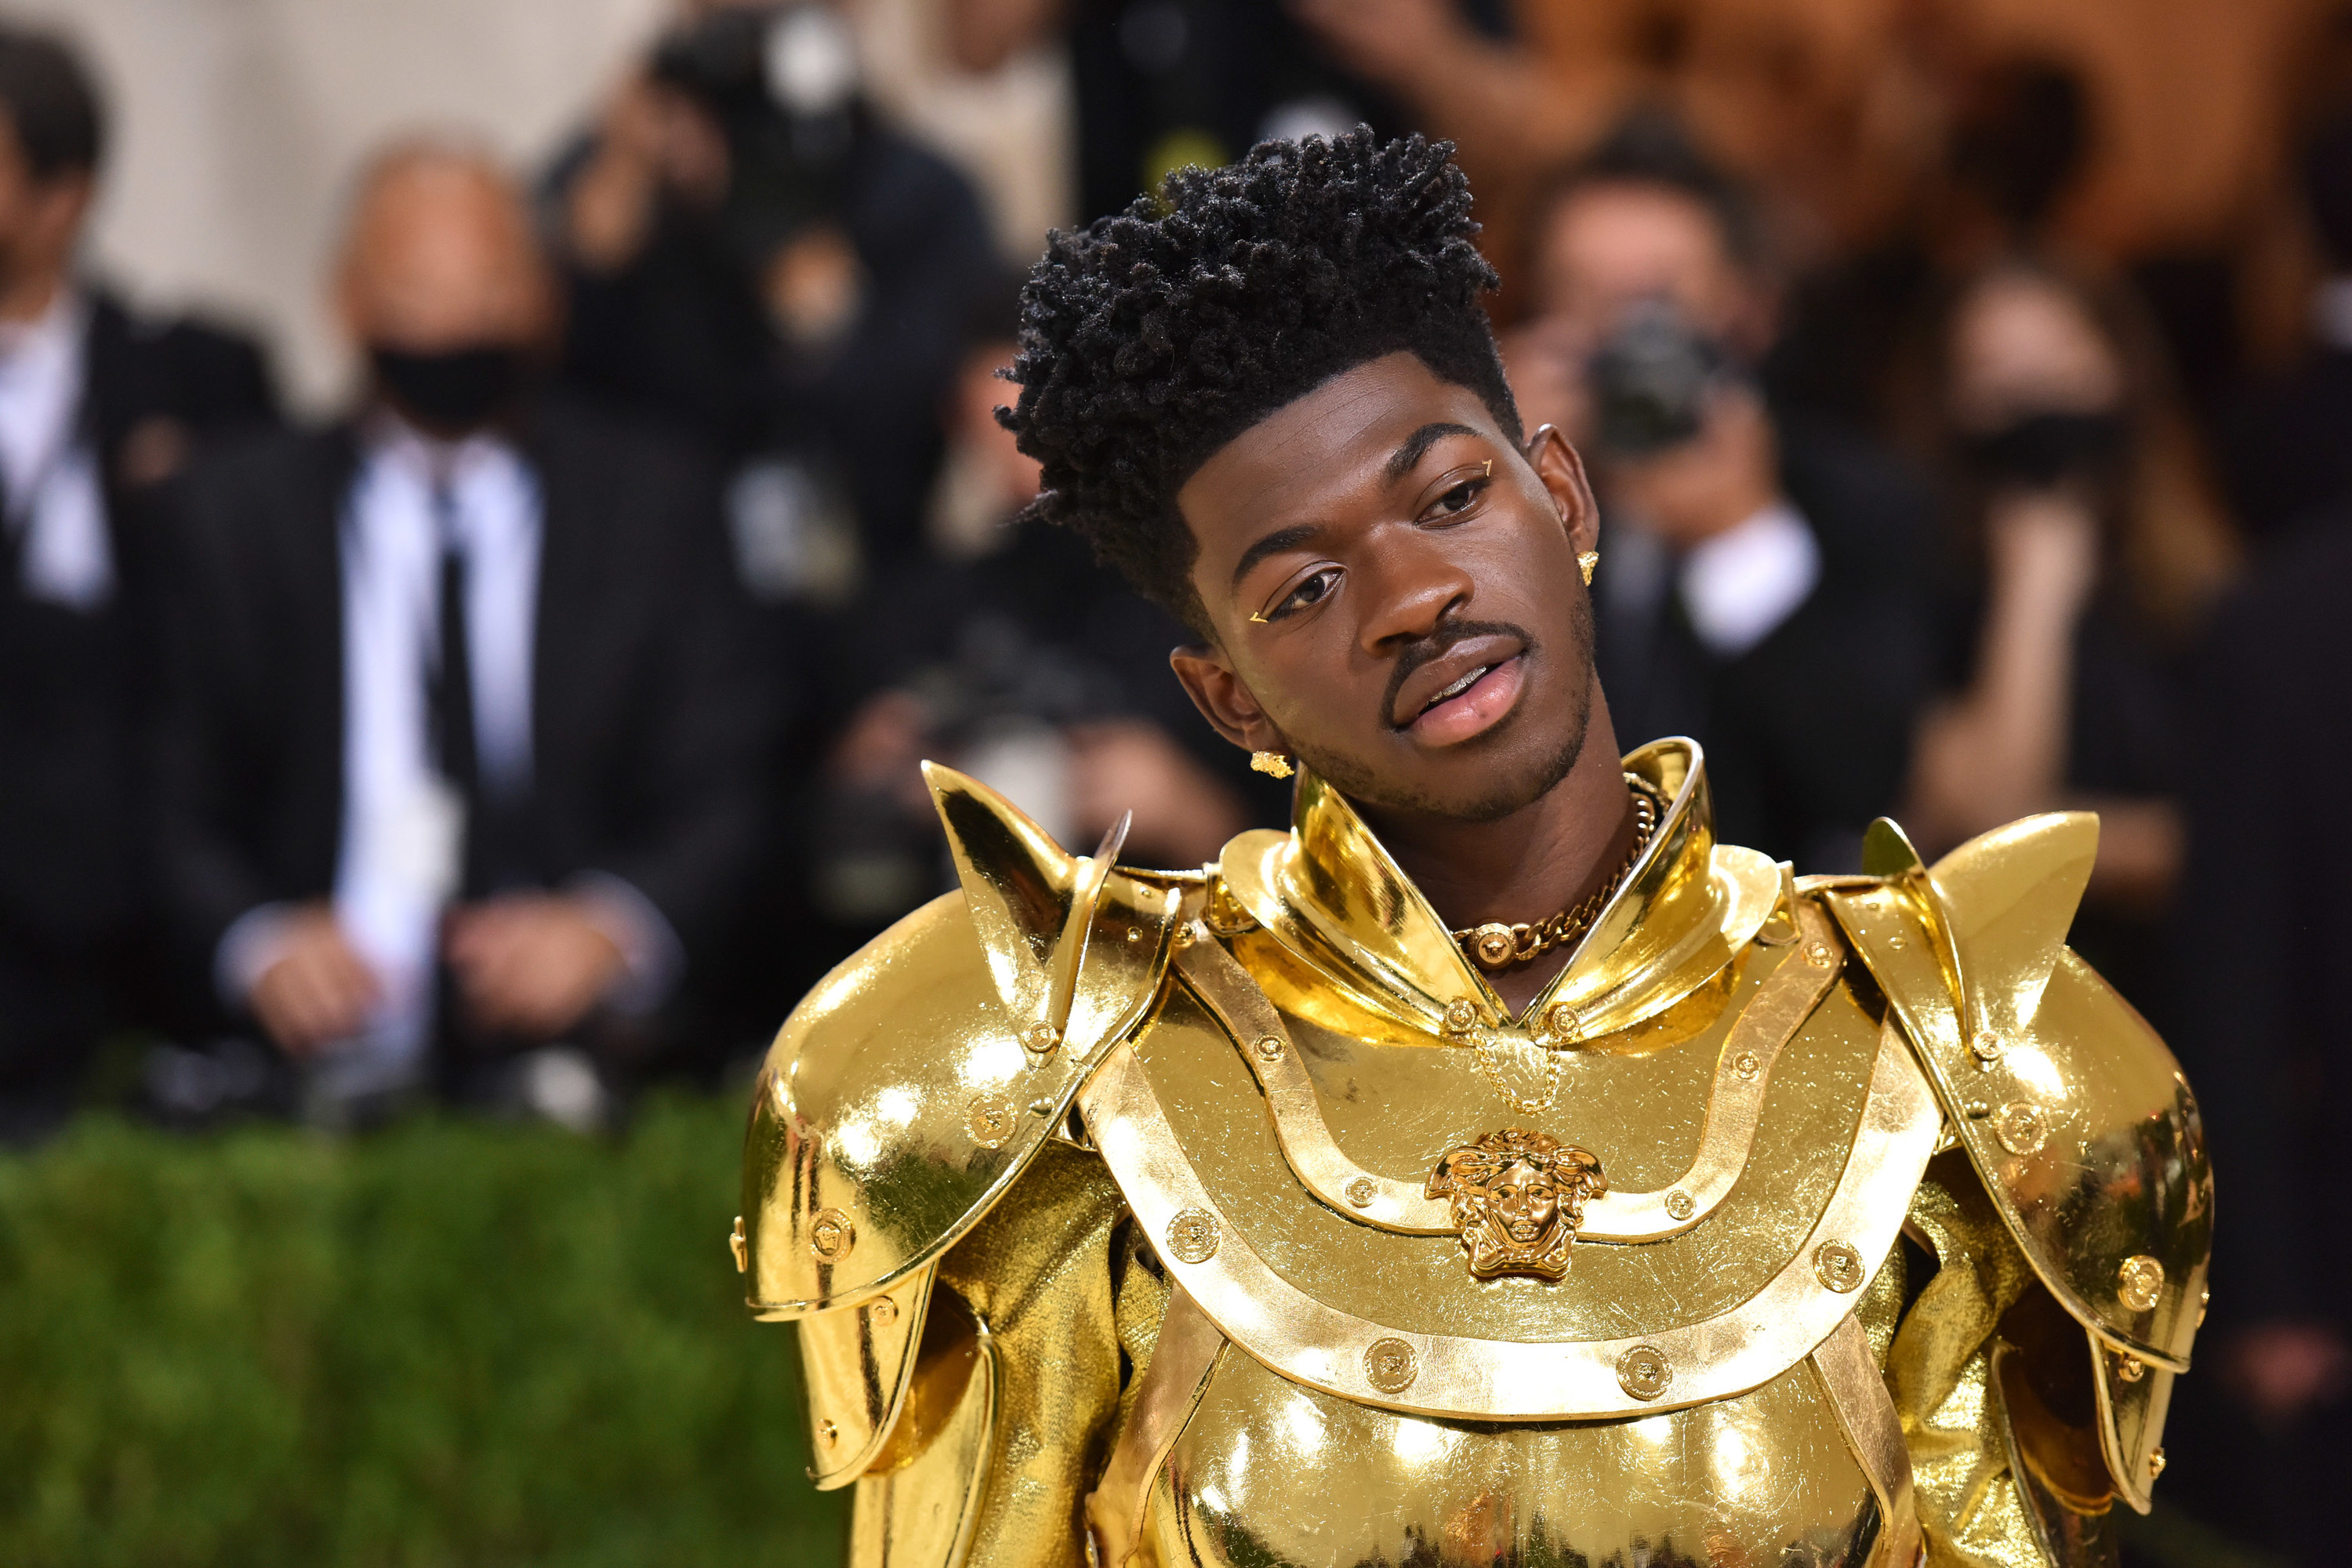 Lil Nas X in gold armor at the Met Gala